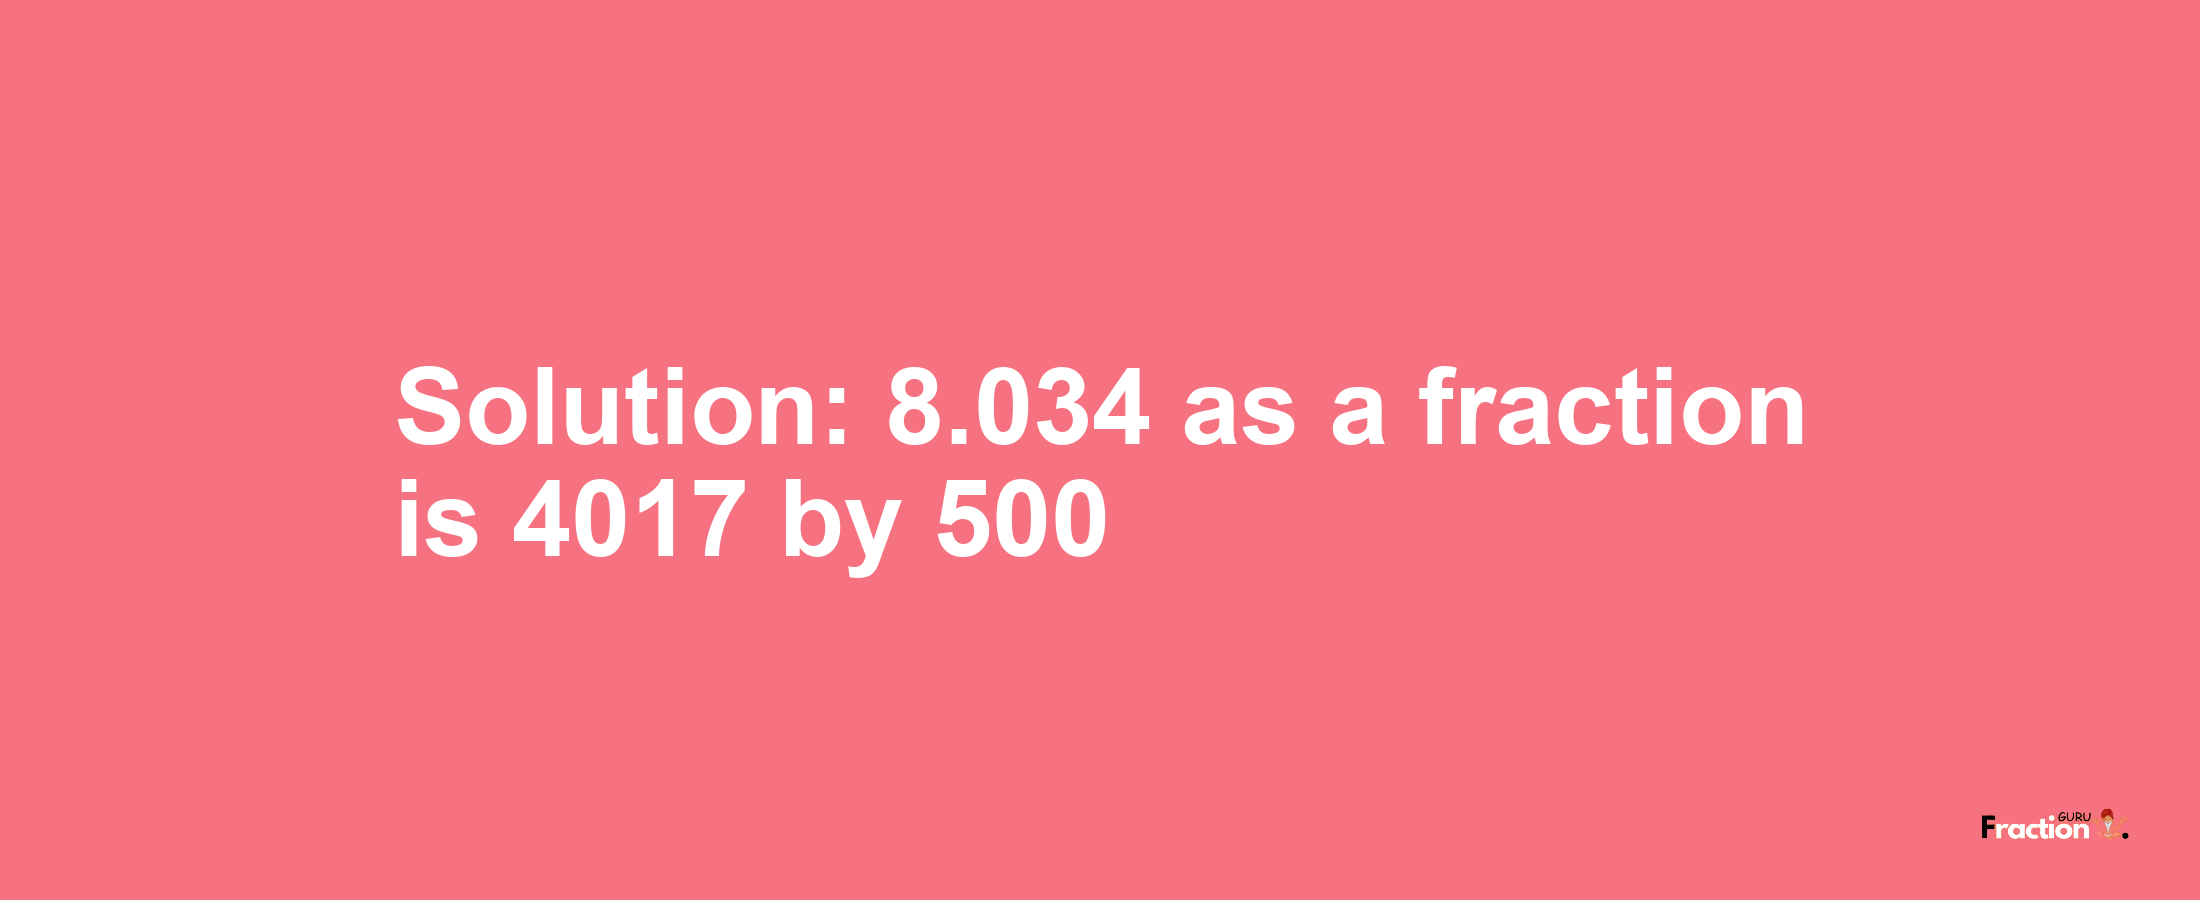 Solution:8.034 as a fraction is 4017/500